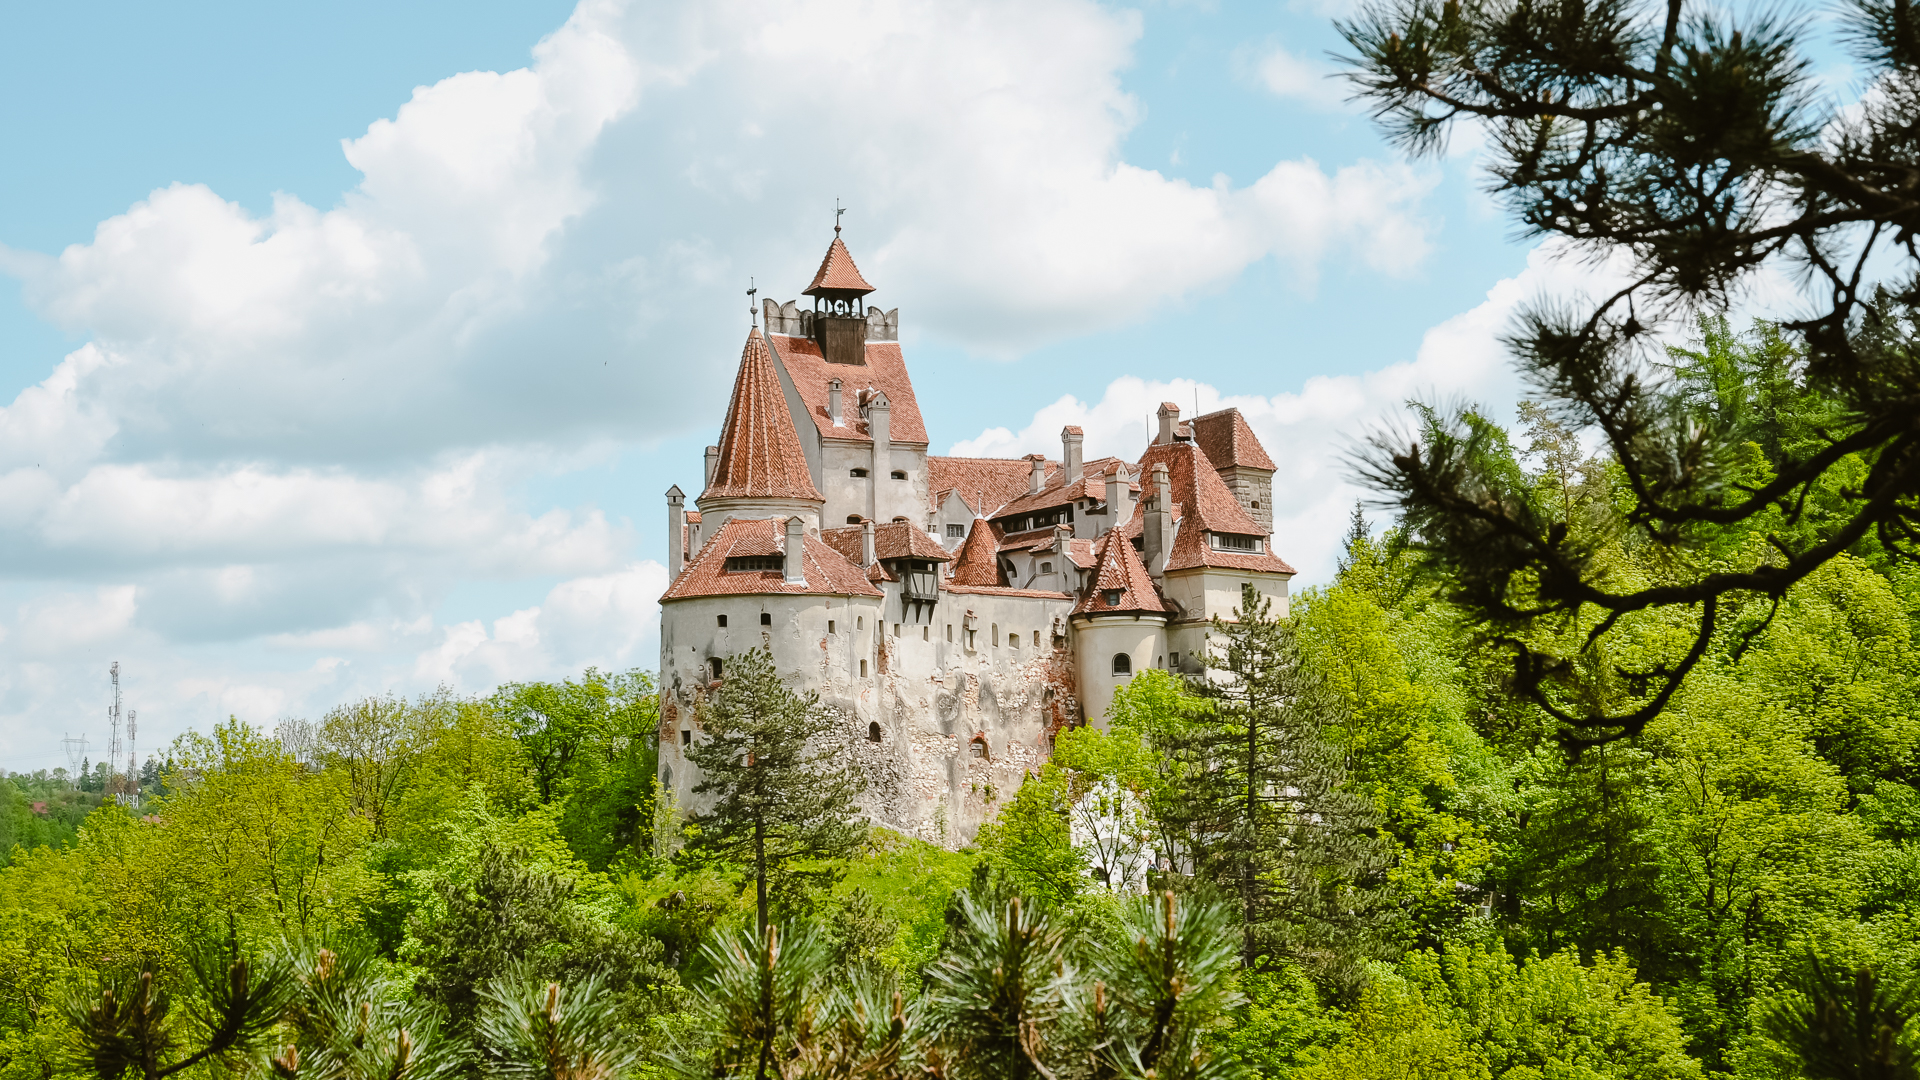 Dracula's Bran Castle panorama as seen from a nearby forest.